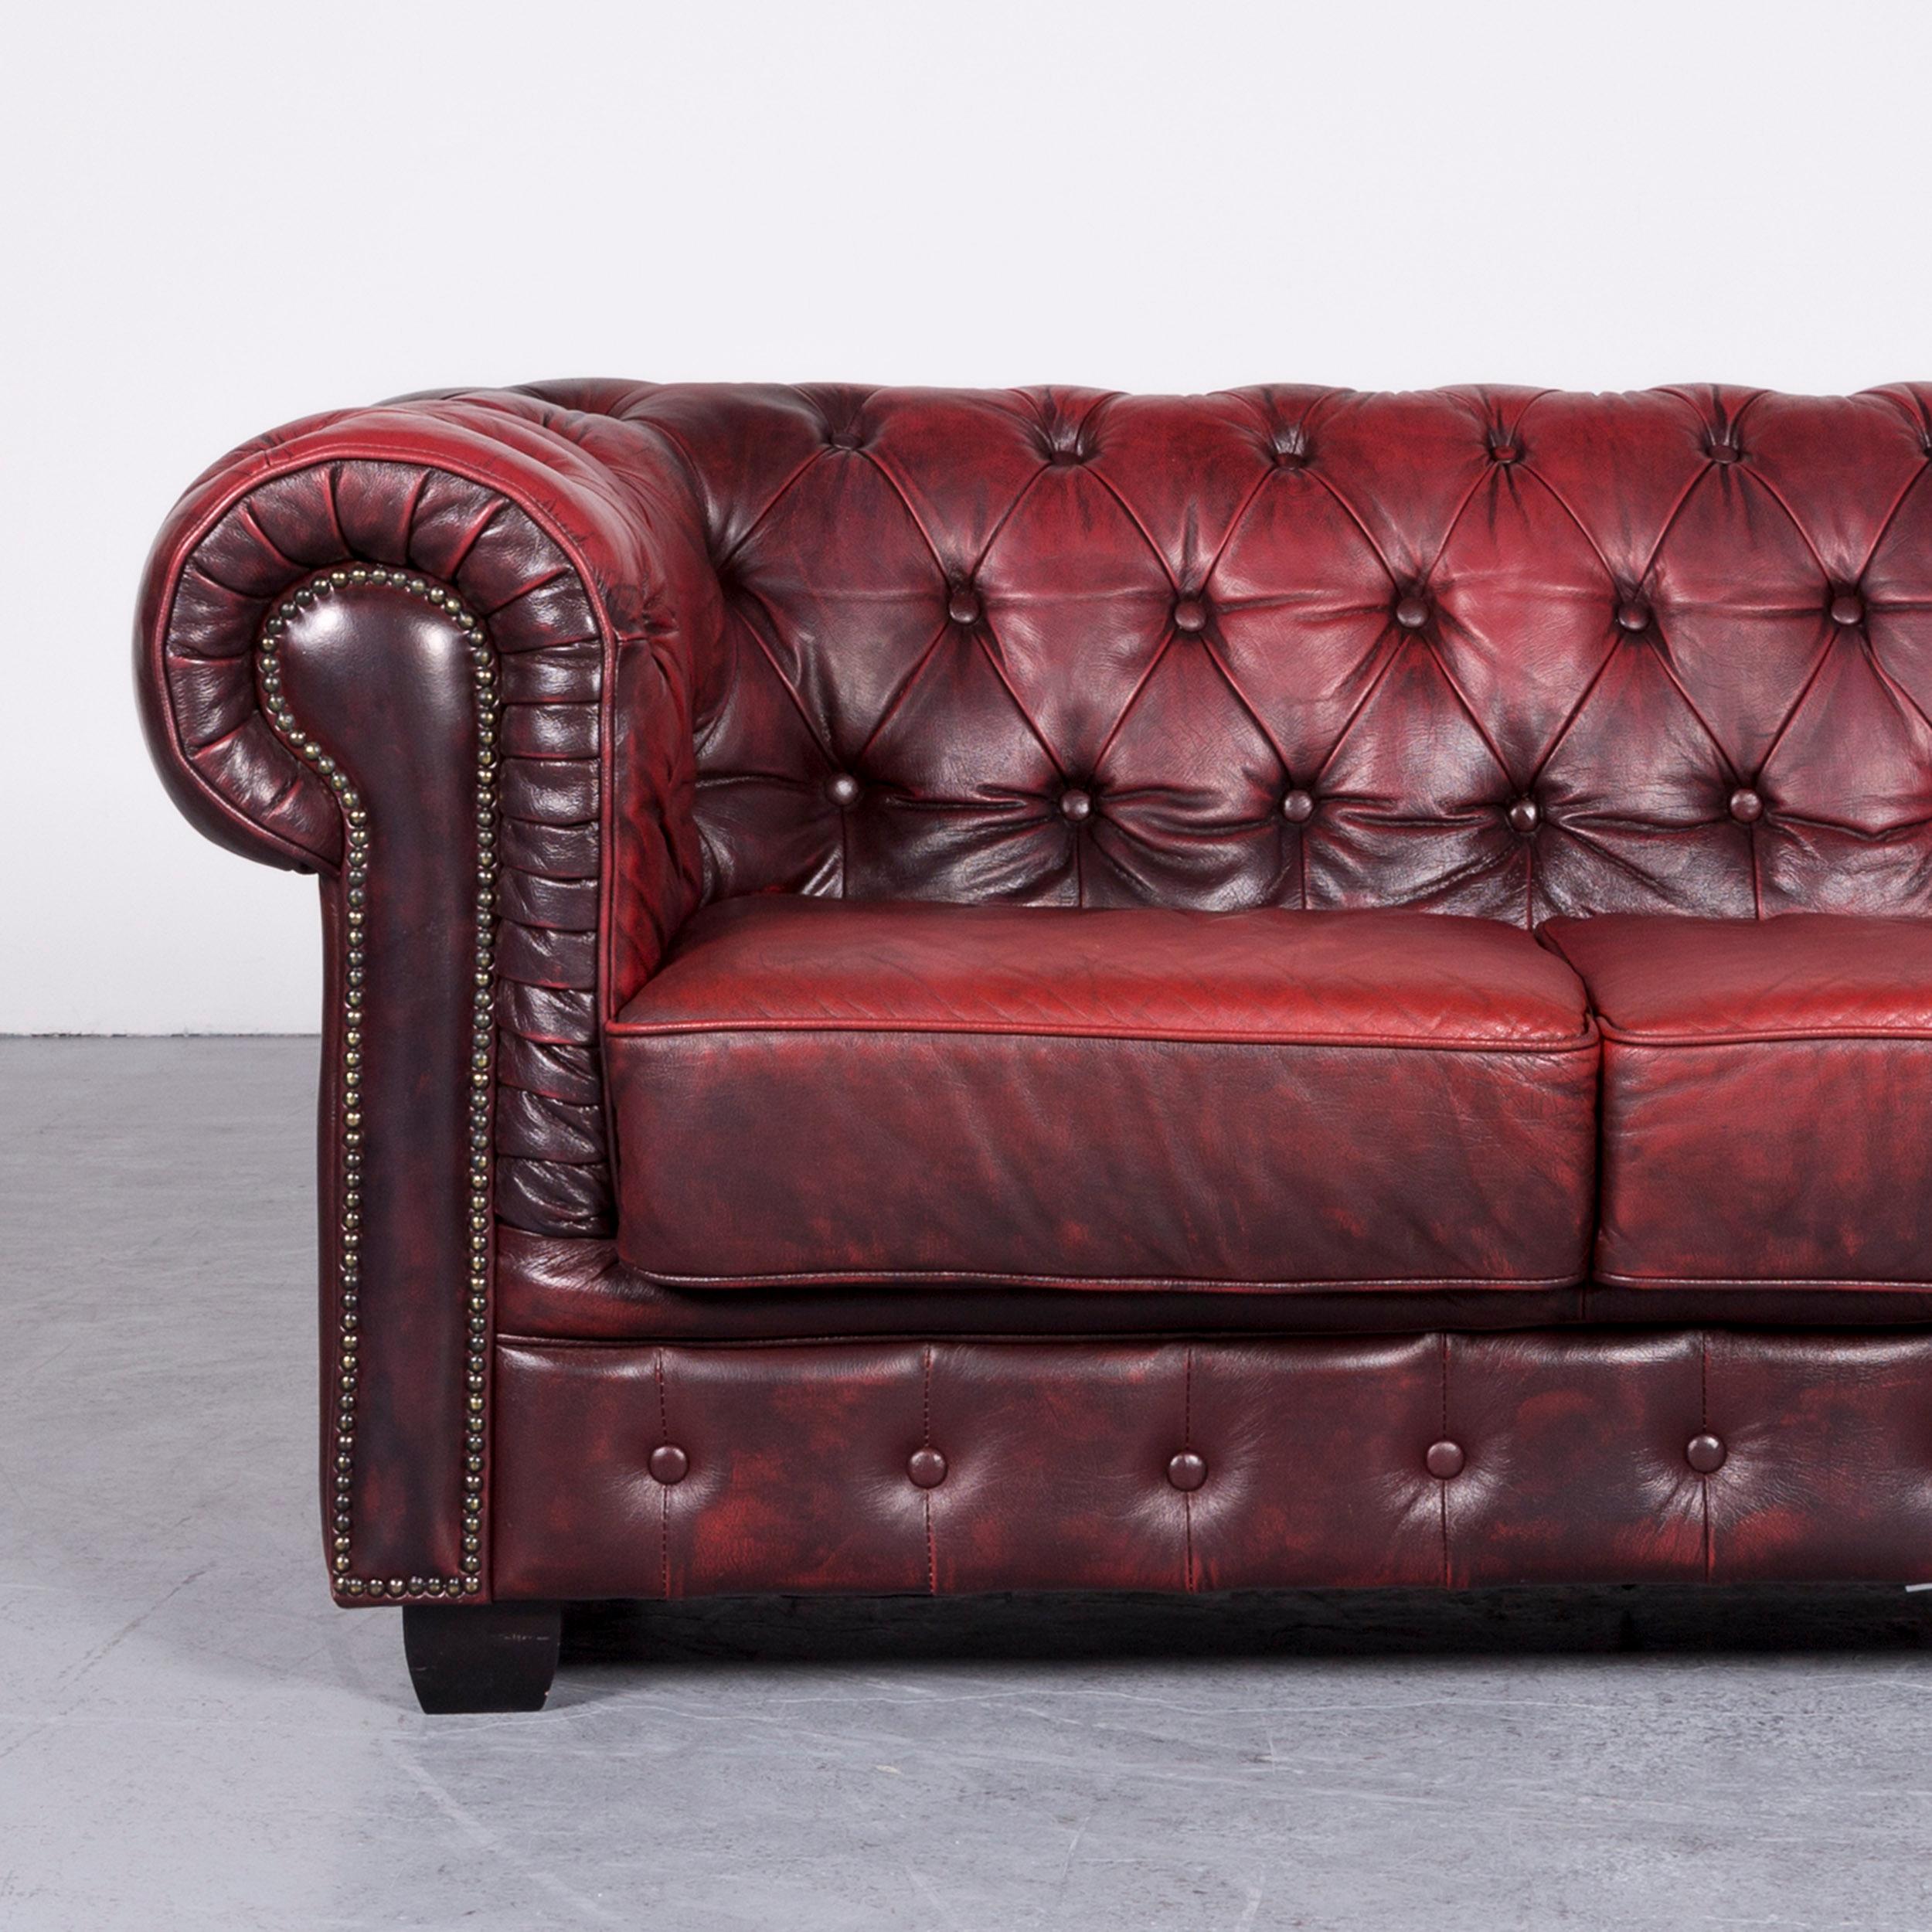 Chesterfield Leather Sofa Set Red Two-Seat Three-Seat Vintage Couch 10